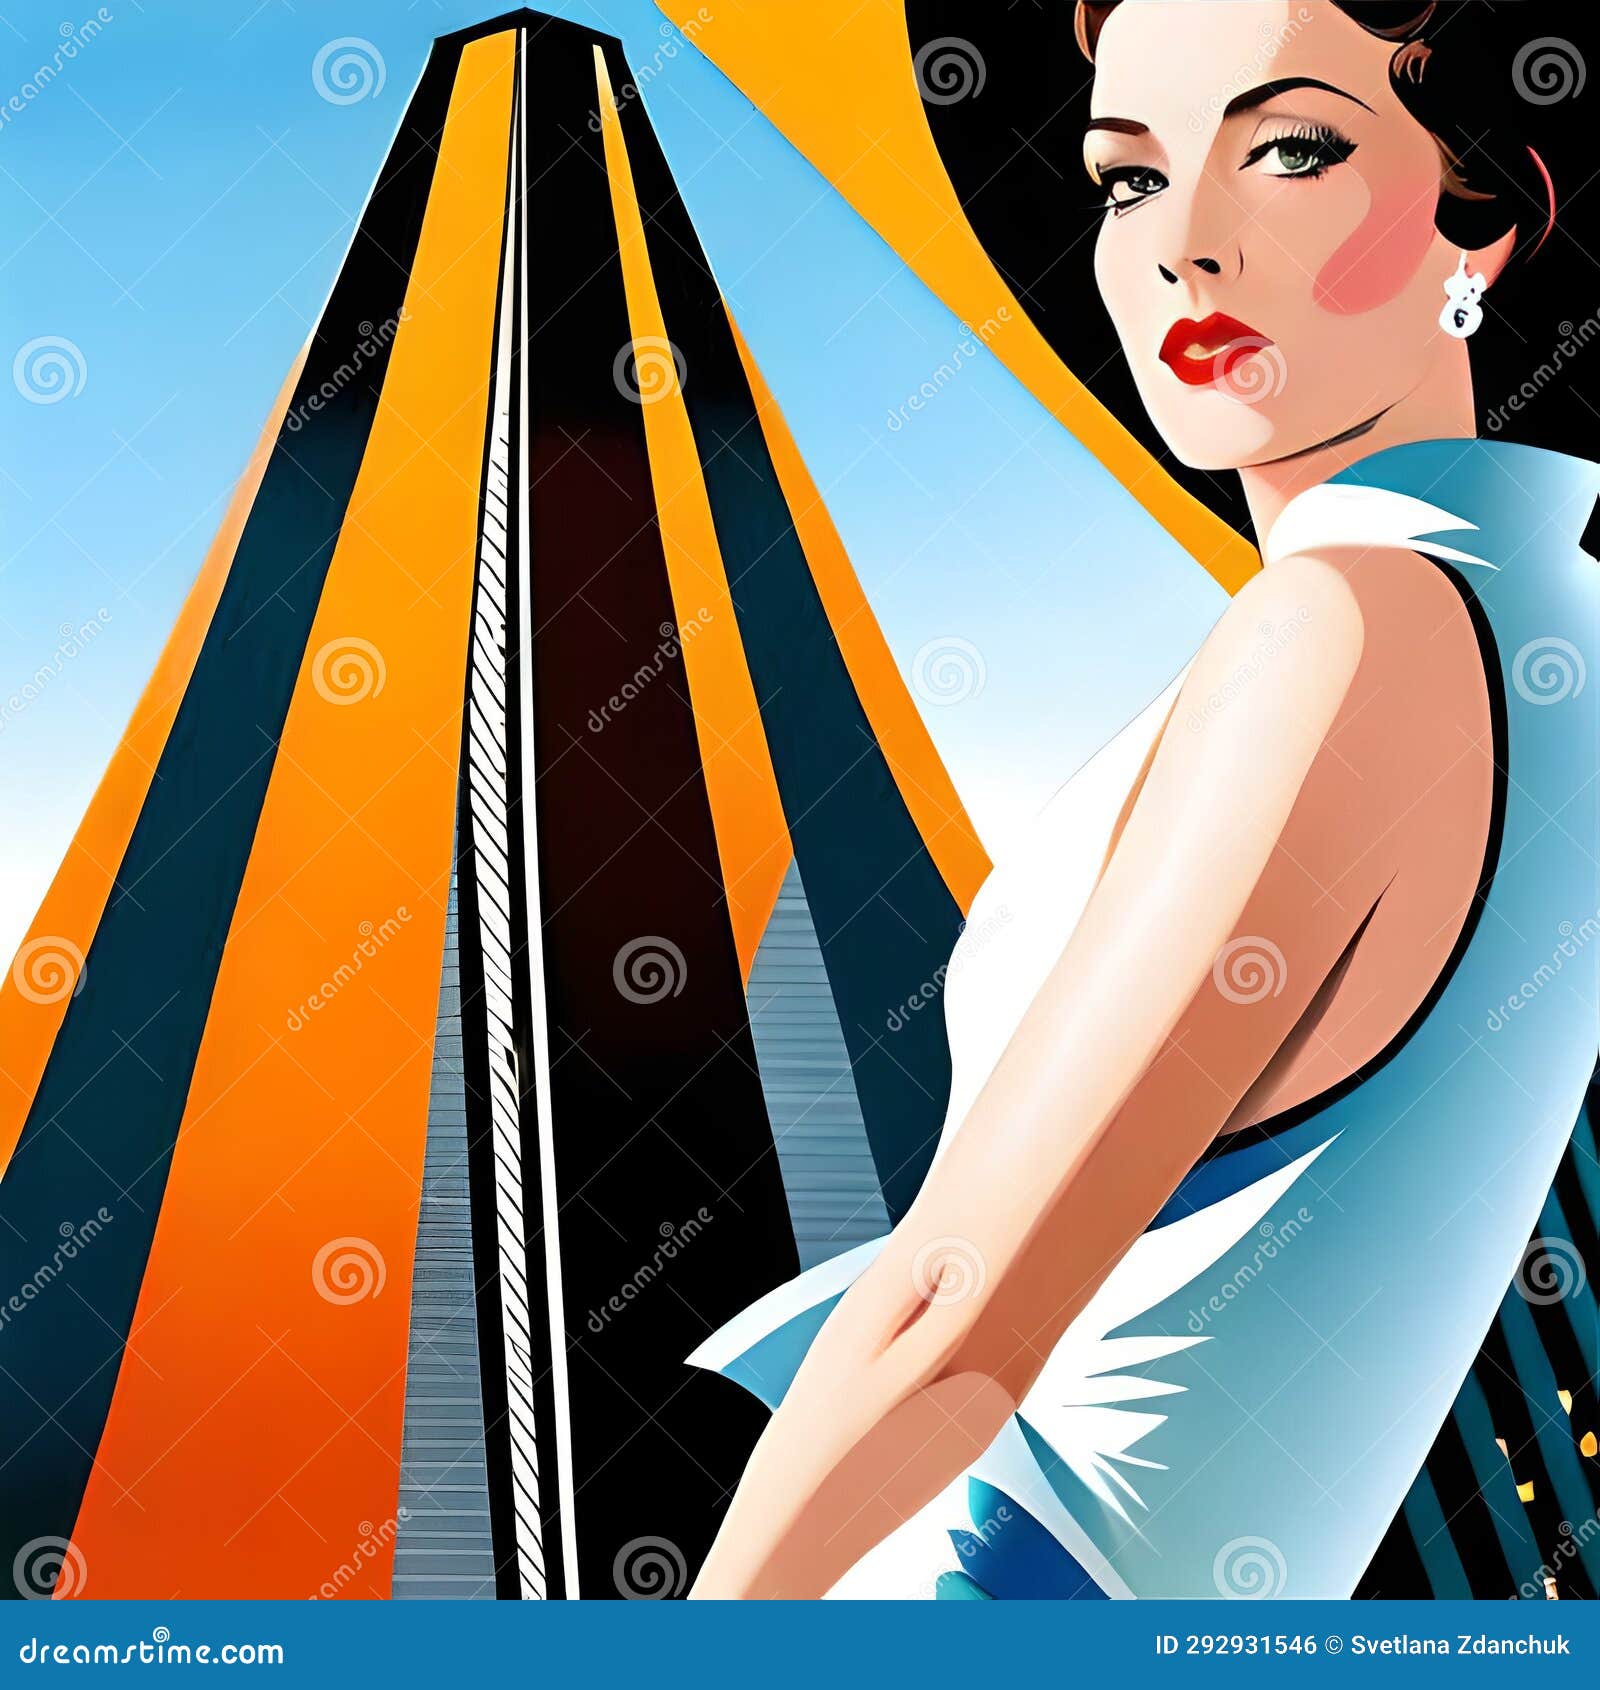 fashion lady model among skyscrappers. fashionable cover art deco style